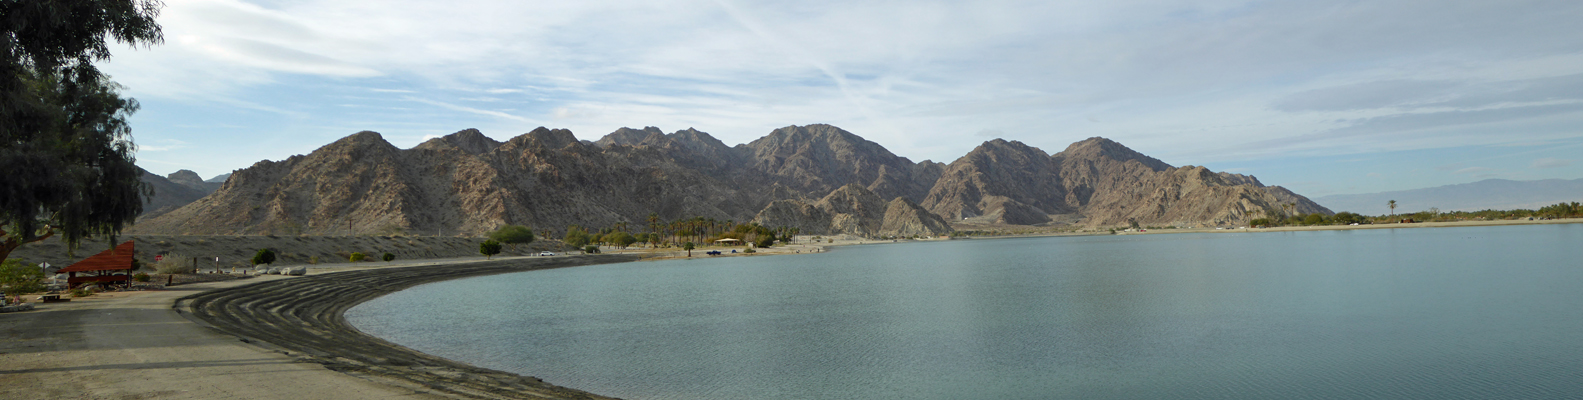 Lake Cahuilla from campground